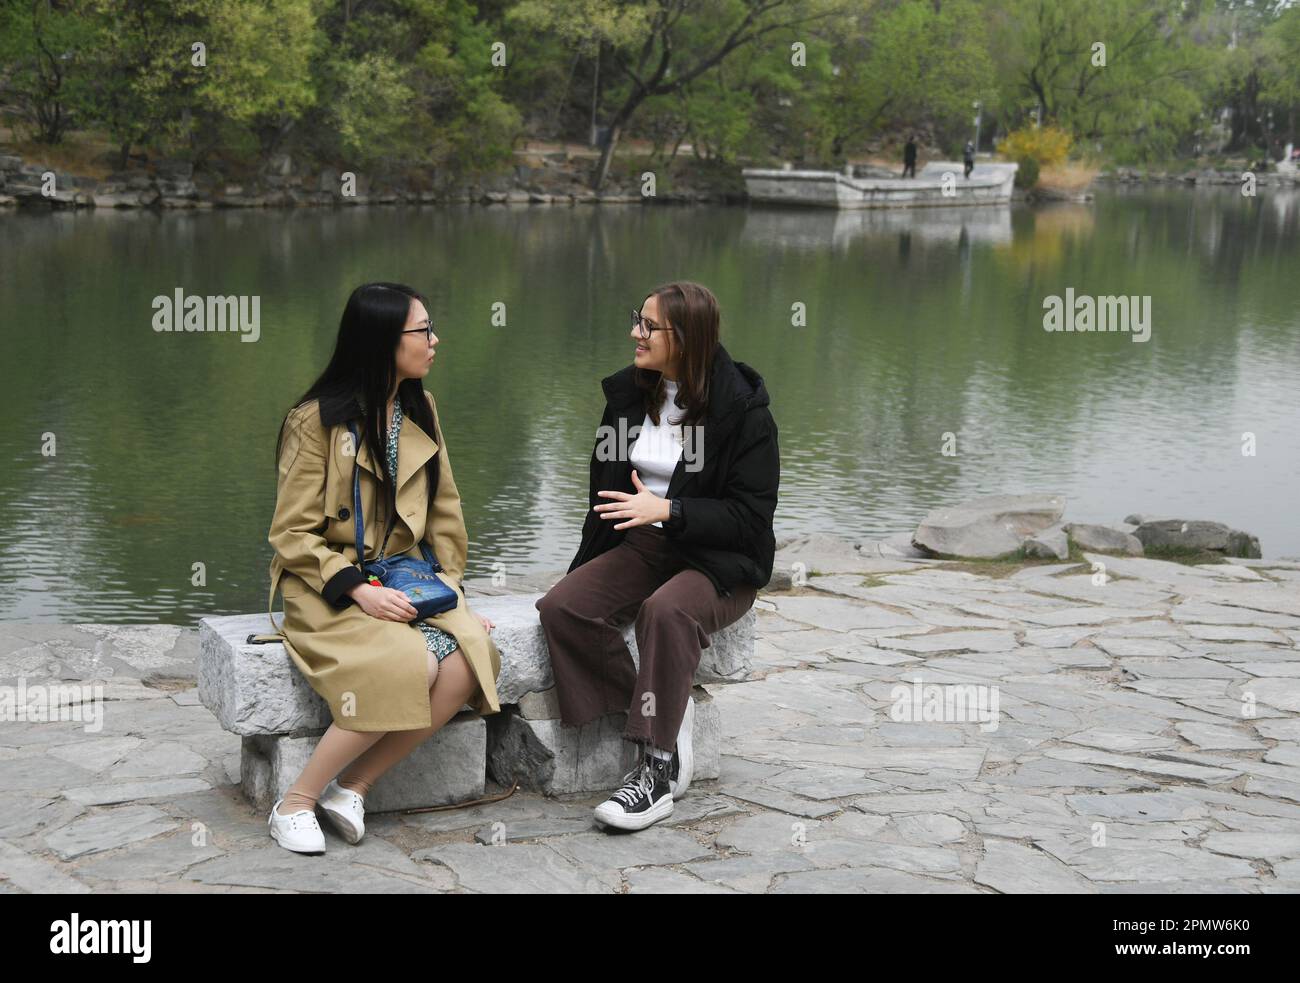 (230415) -- BEIJING, April 15, 2023 (Xinhua) -- Maria (R) chats with her language partner Yin Yue, a student majoring in Teaching Chinese as a Second Language, at Peking University in Beijing, capital of China, April 13, 2023. Maria Eduarda Variani, Rafaela Viana dos Santos, Manuela Boiteux Pestana, and Marco Andre Rocha Germano are Brazilian students studying in the Master of China Studies program at the Yenching Academy of Peking University in China. The four of them have been interested in Chinese culture since they were young. After arriving in Beijing, they have been impressed by the Stock Photo